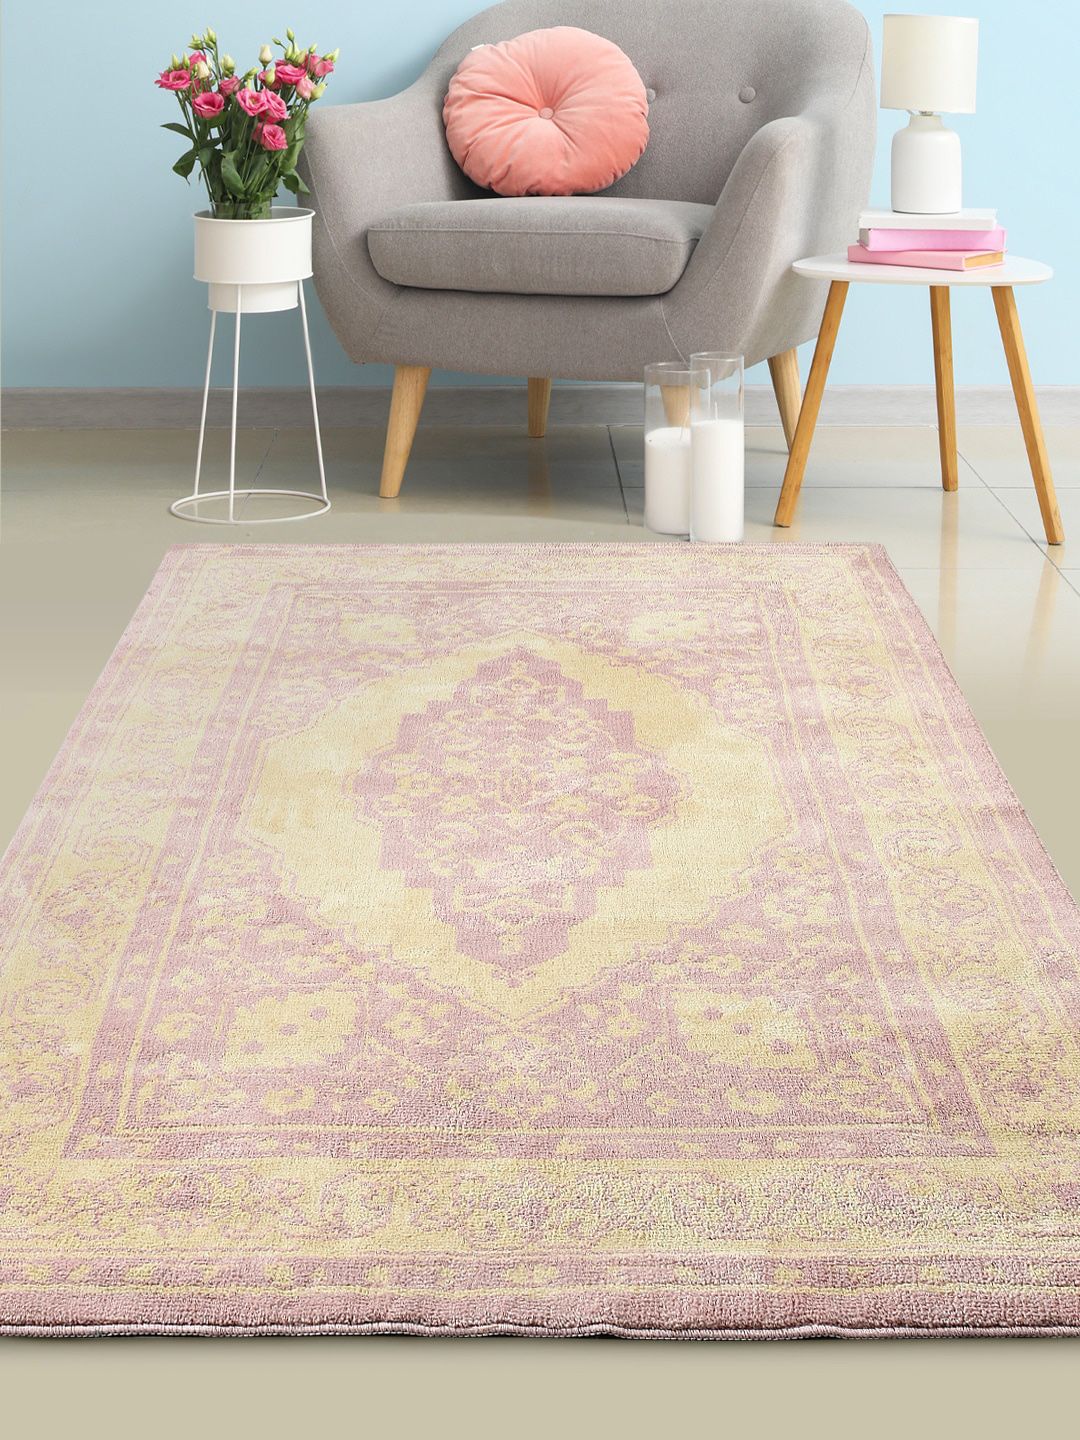 Saral Home Pink & Beige Printed Cotton Carpet Price in India